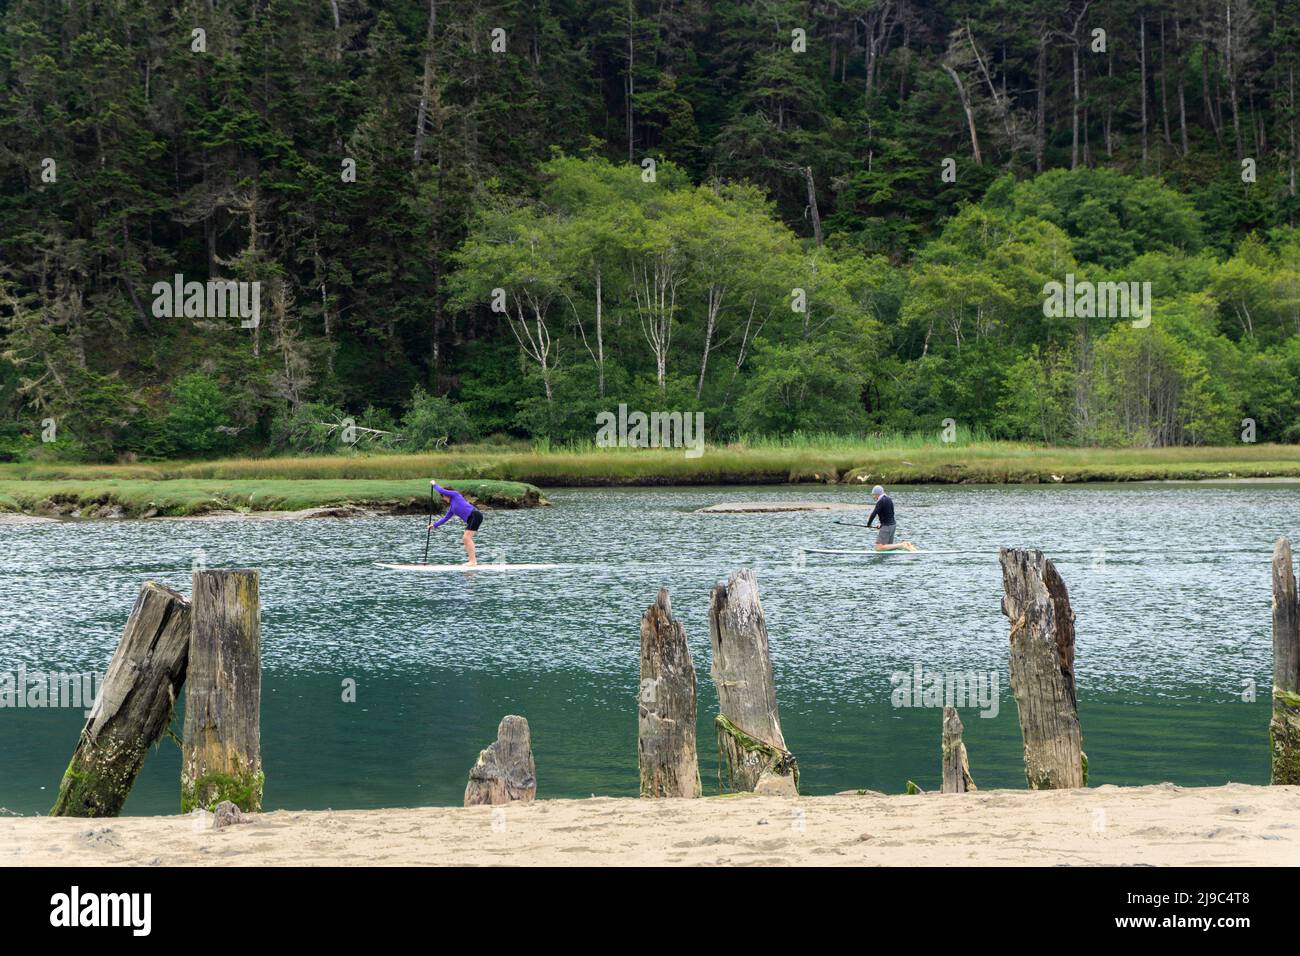 Paddle boarding on the Albion River in California. Stock Photo